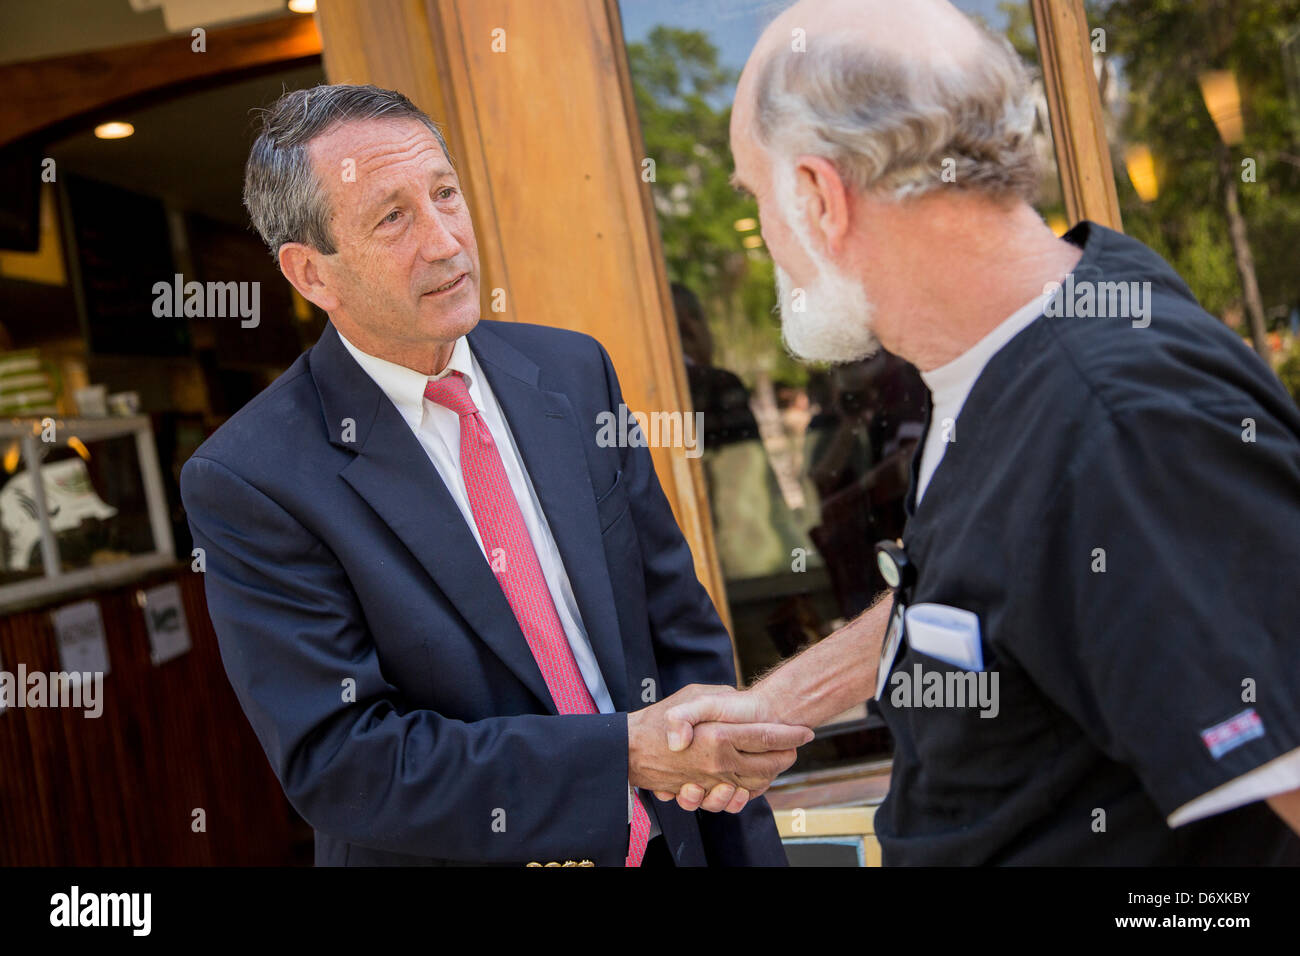 Former South Carolina Governor Mark Sanford greets a supporter while campaigning April 24, 2013 in Charleston, South Carolina. Stock Photo